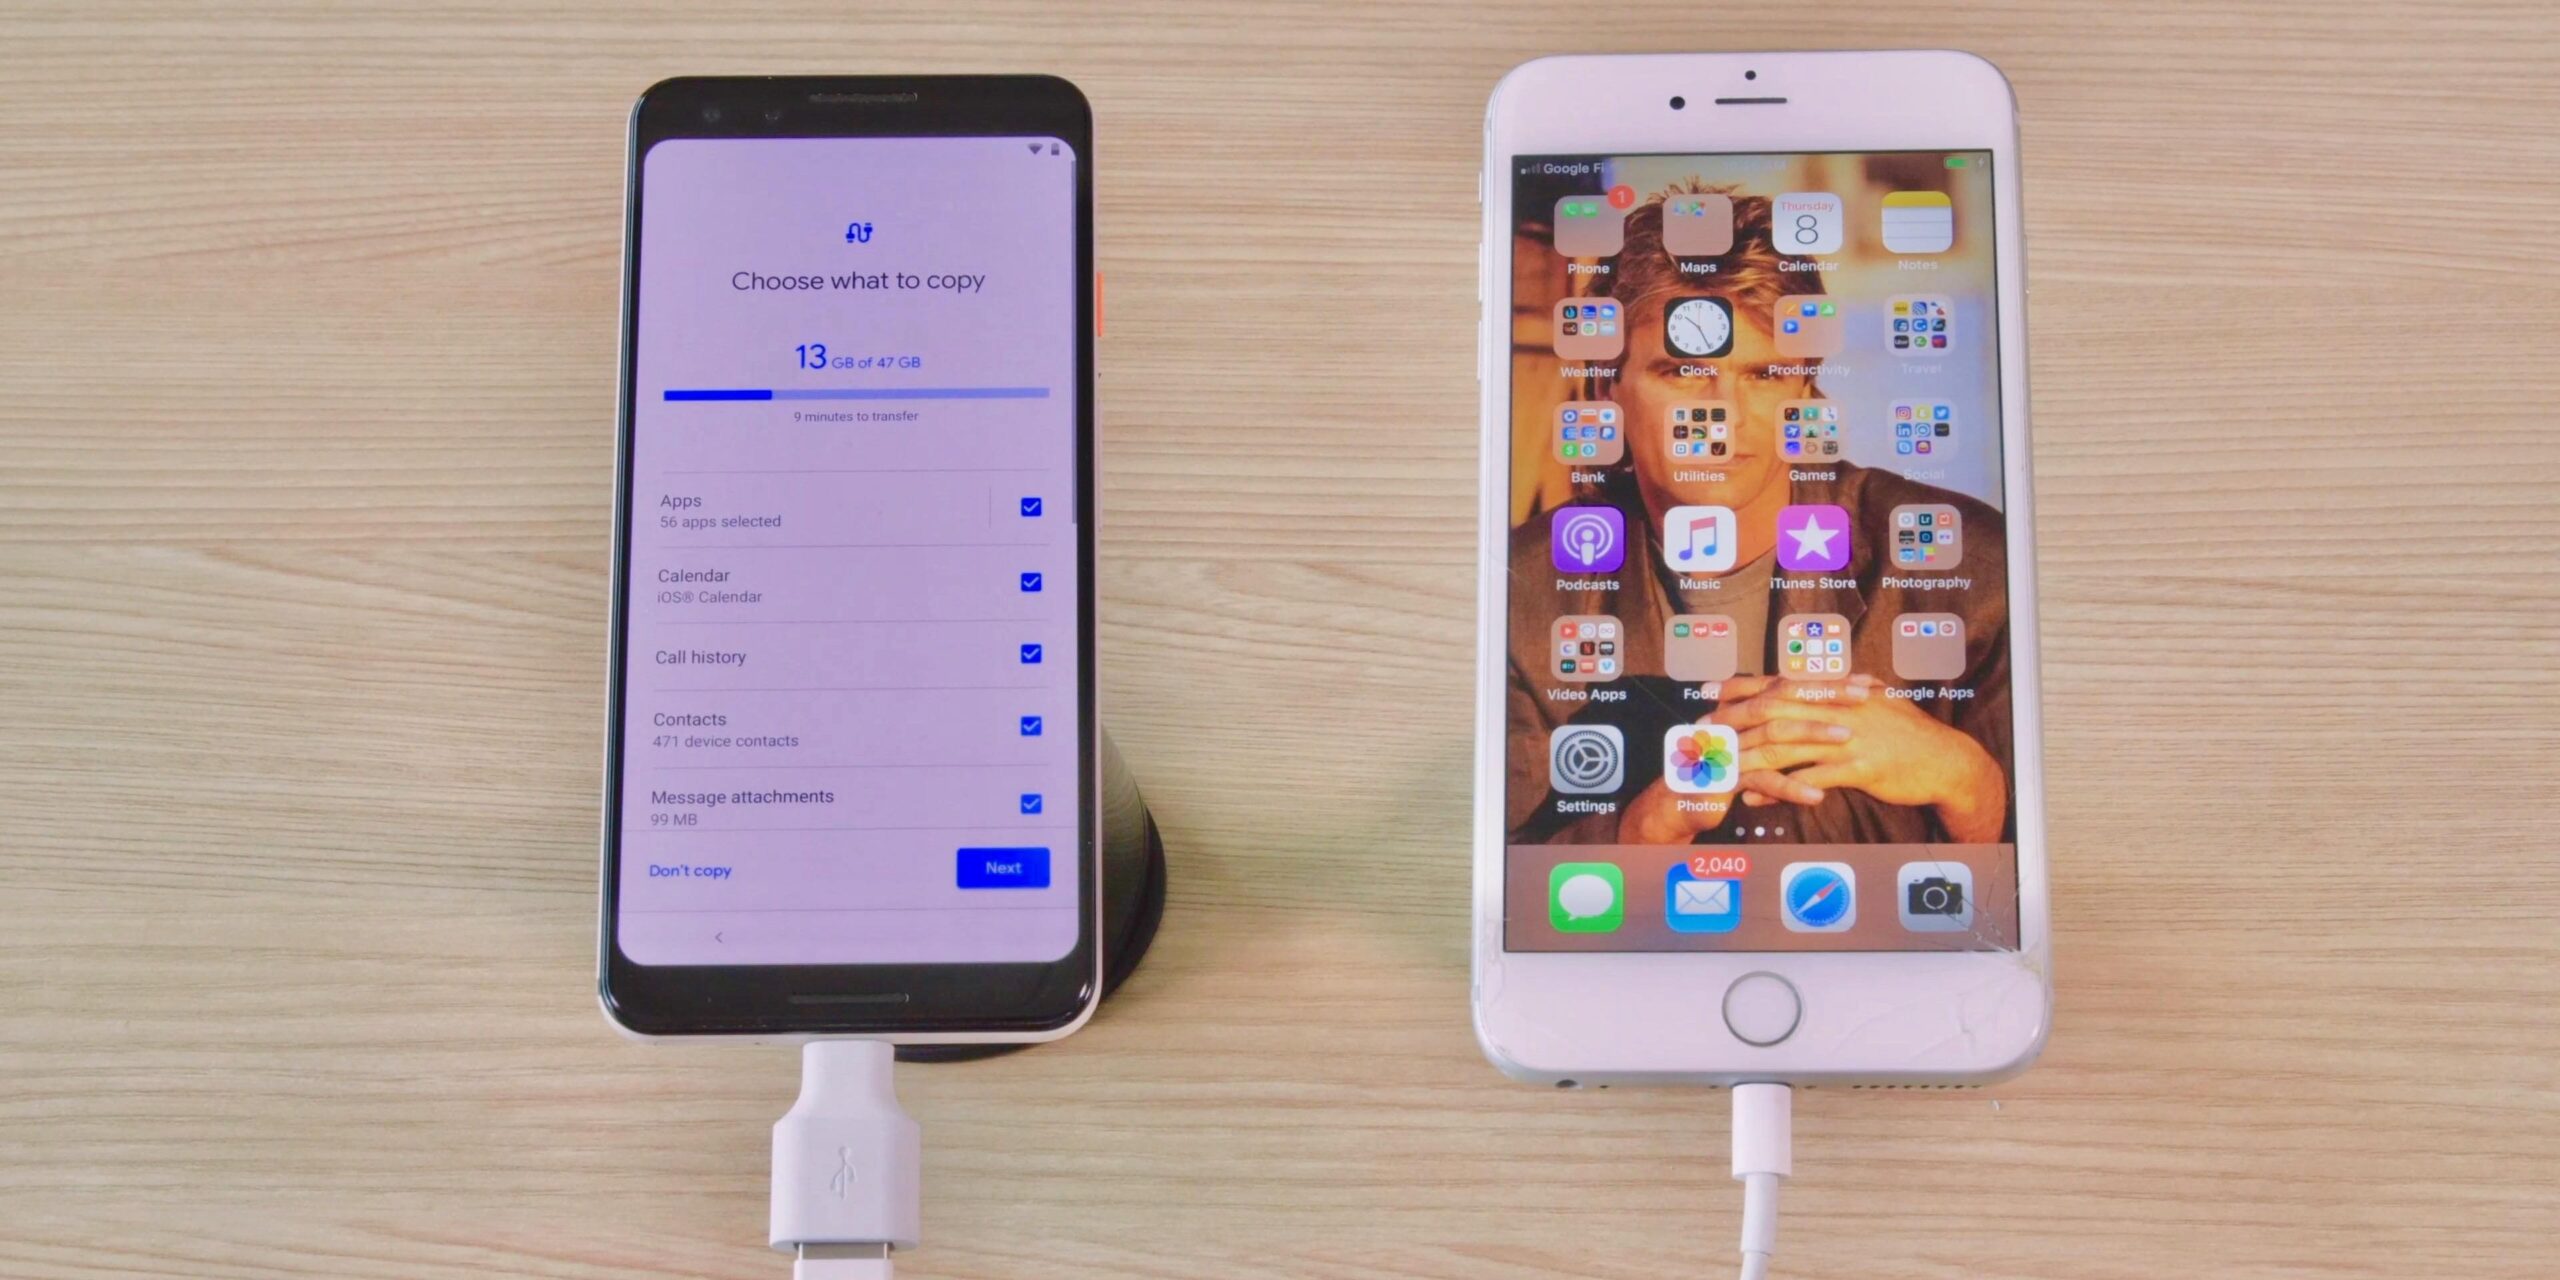 How to Transfer Files From iPhone To Android